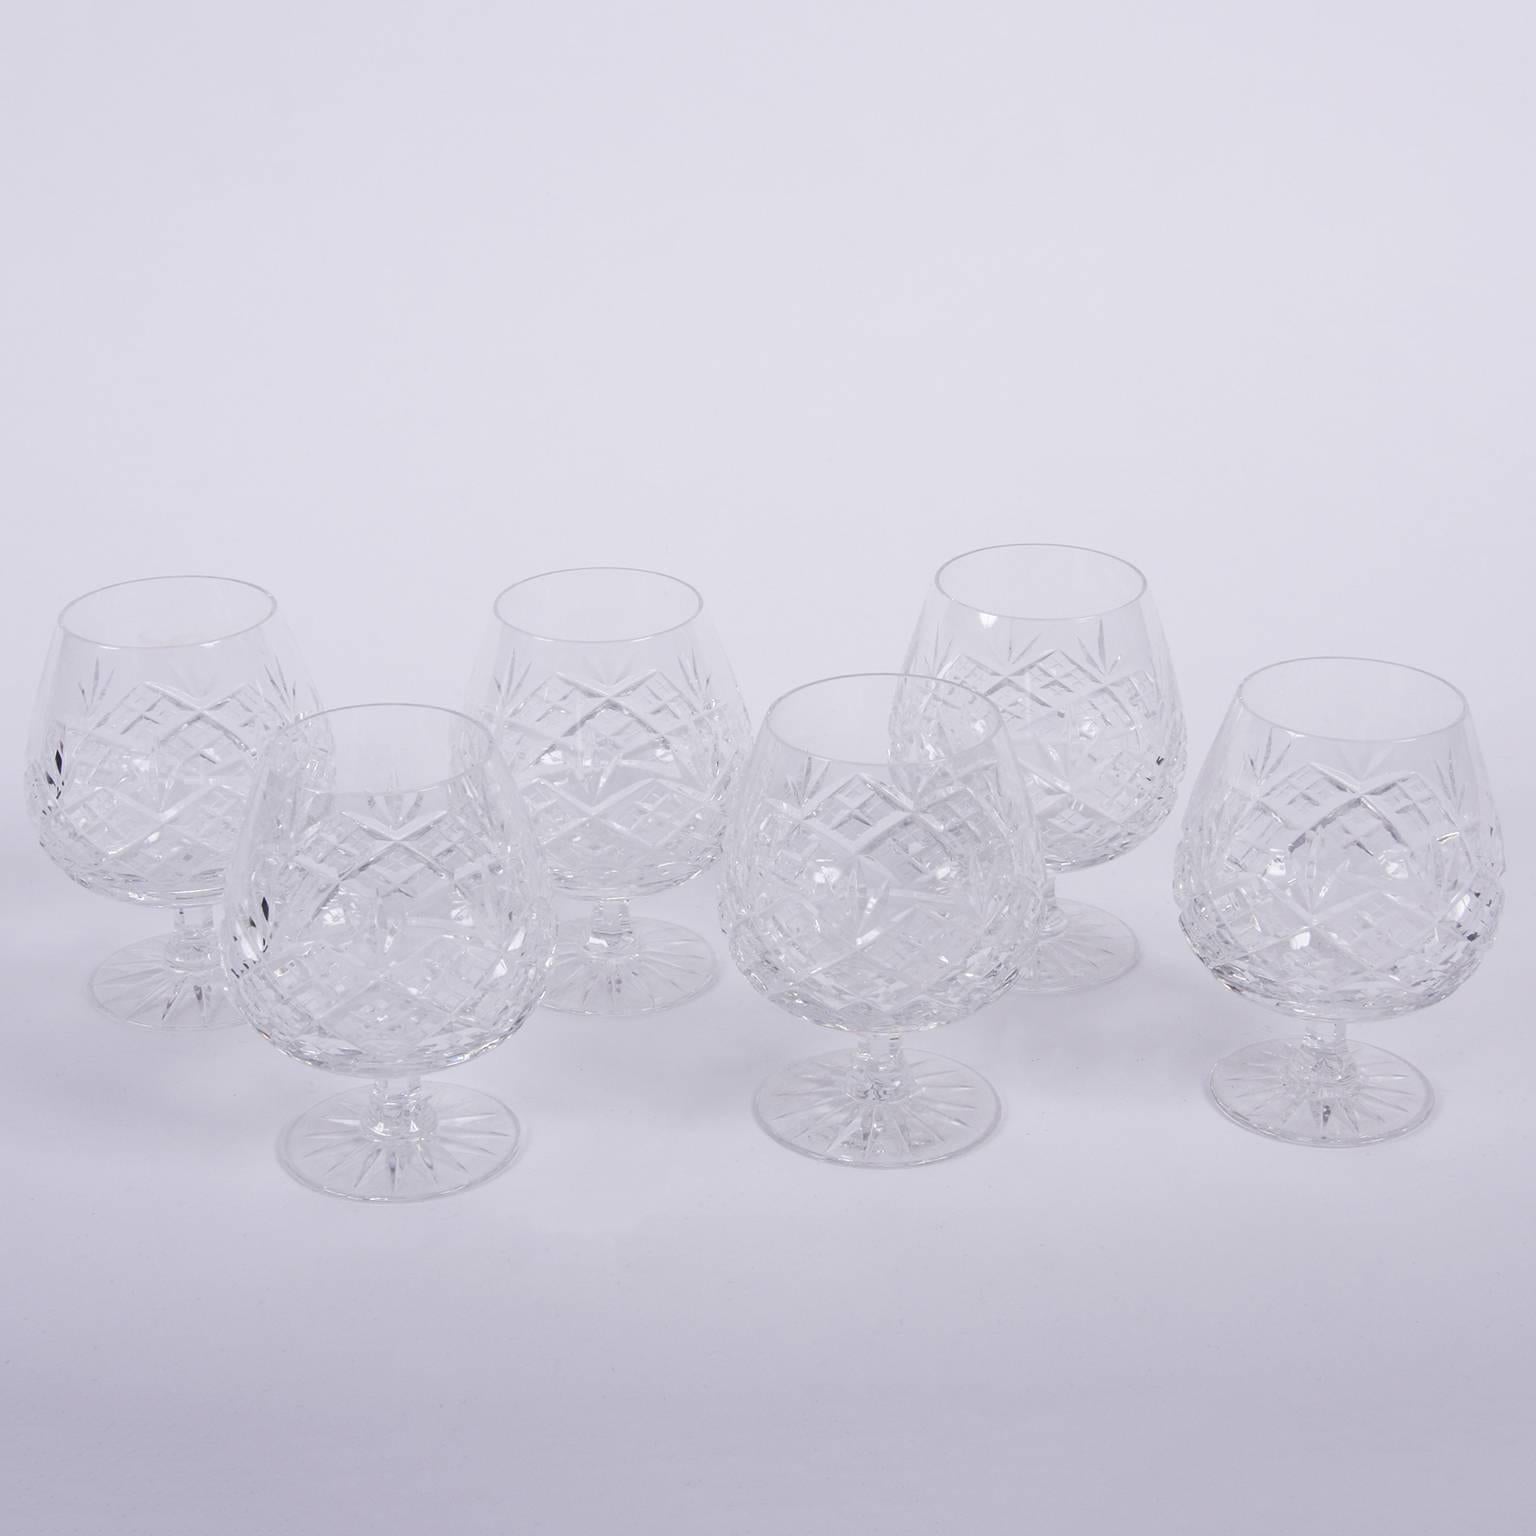 Set of English Mid-20th Century Cut Glass Brandy Glasses In Good Condition For Sale In London, GB